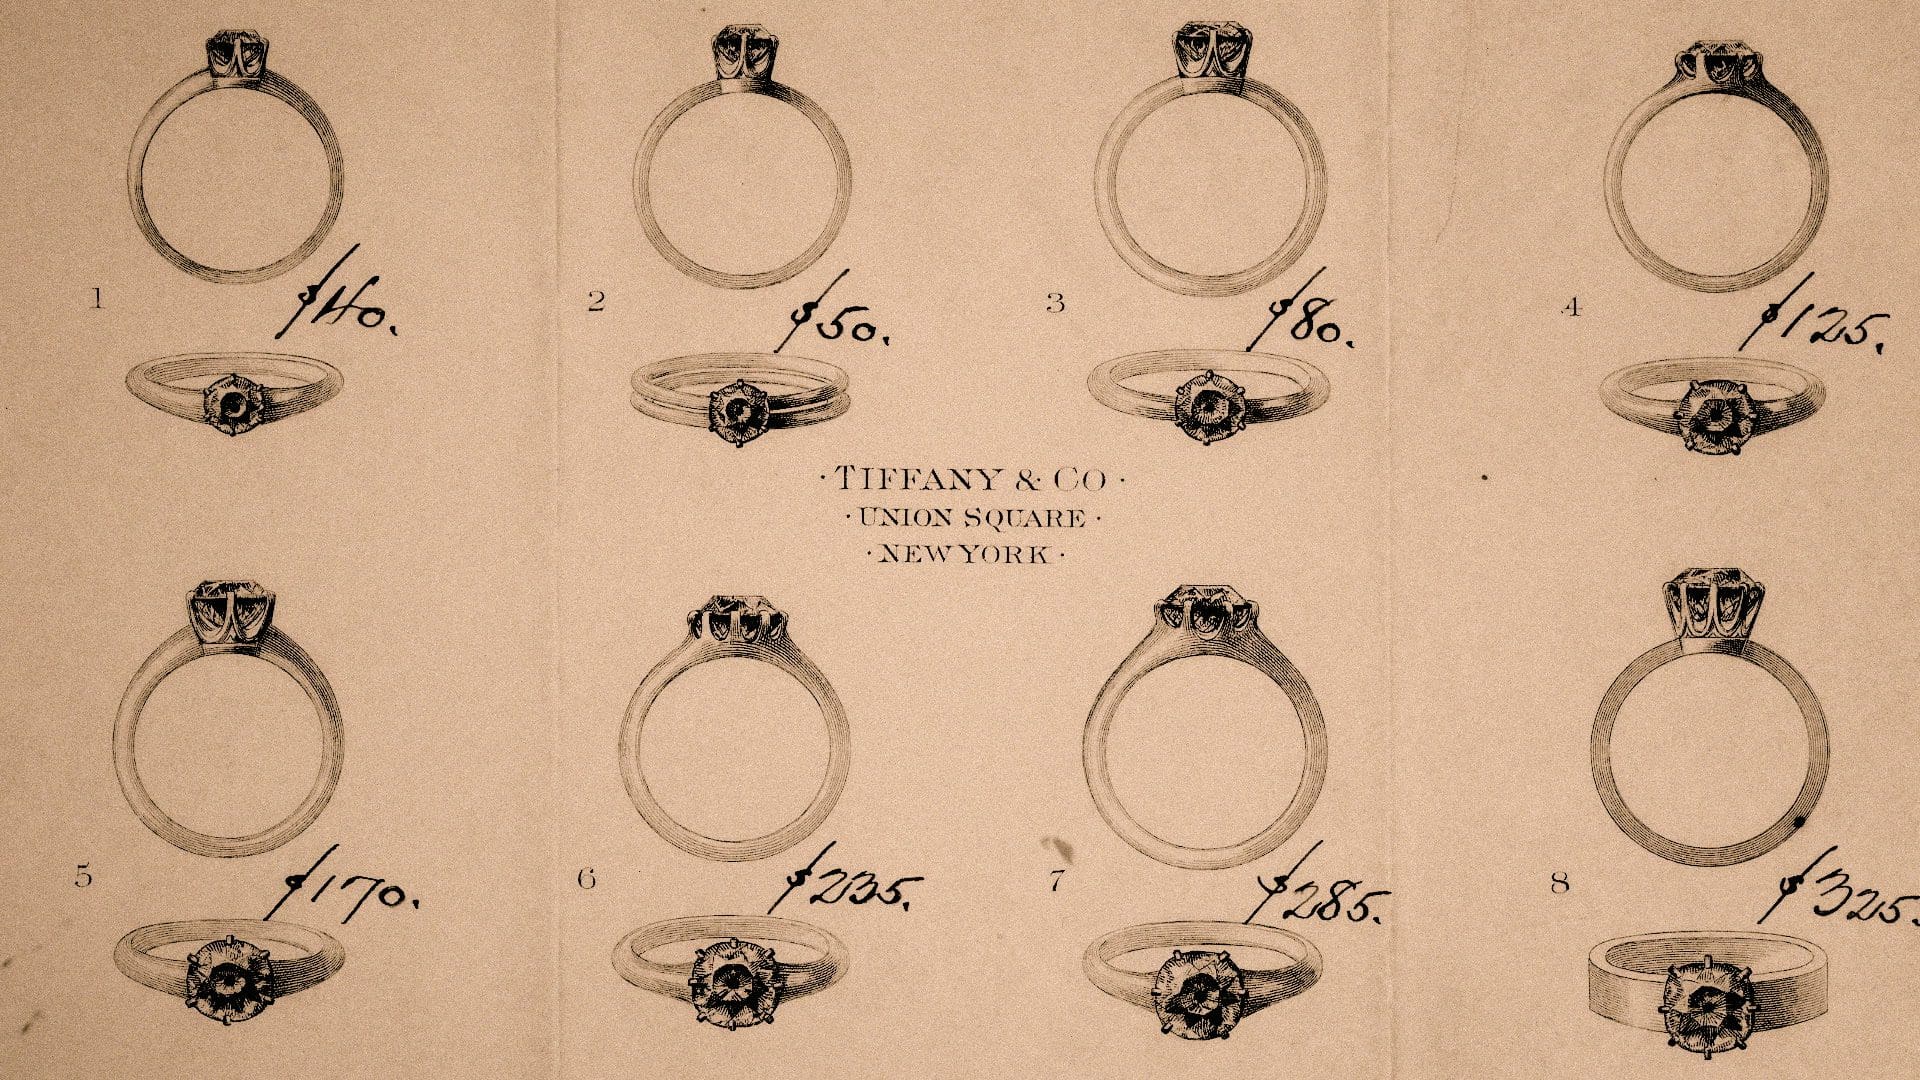 Vintage Tiffany & Co. advertisement showcasing a selection of eight engagement rings with prices, illustrating the classic jewelry styles offered at their Union Square store in New York.